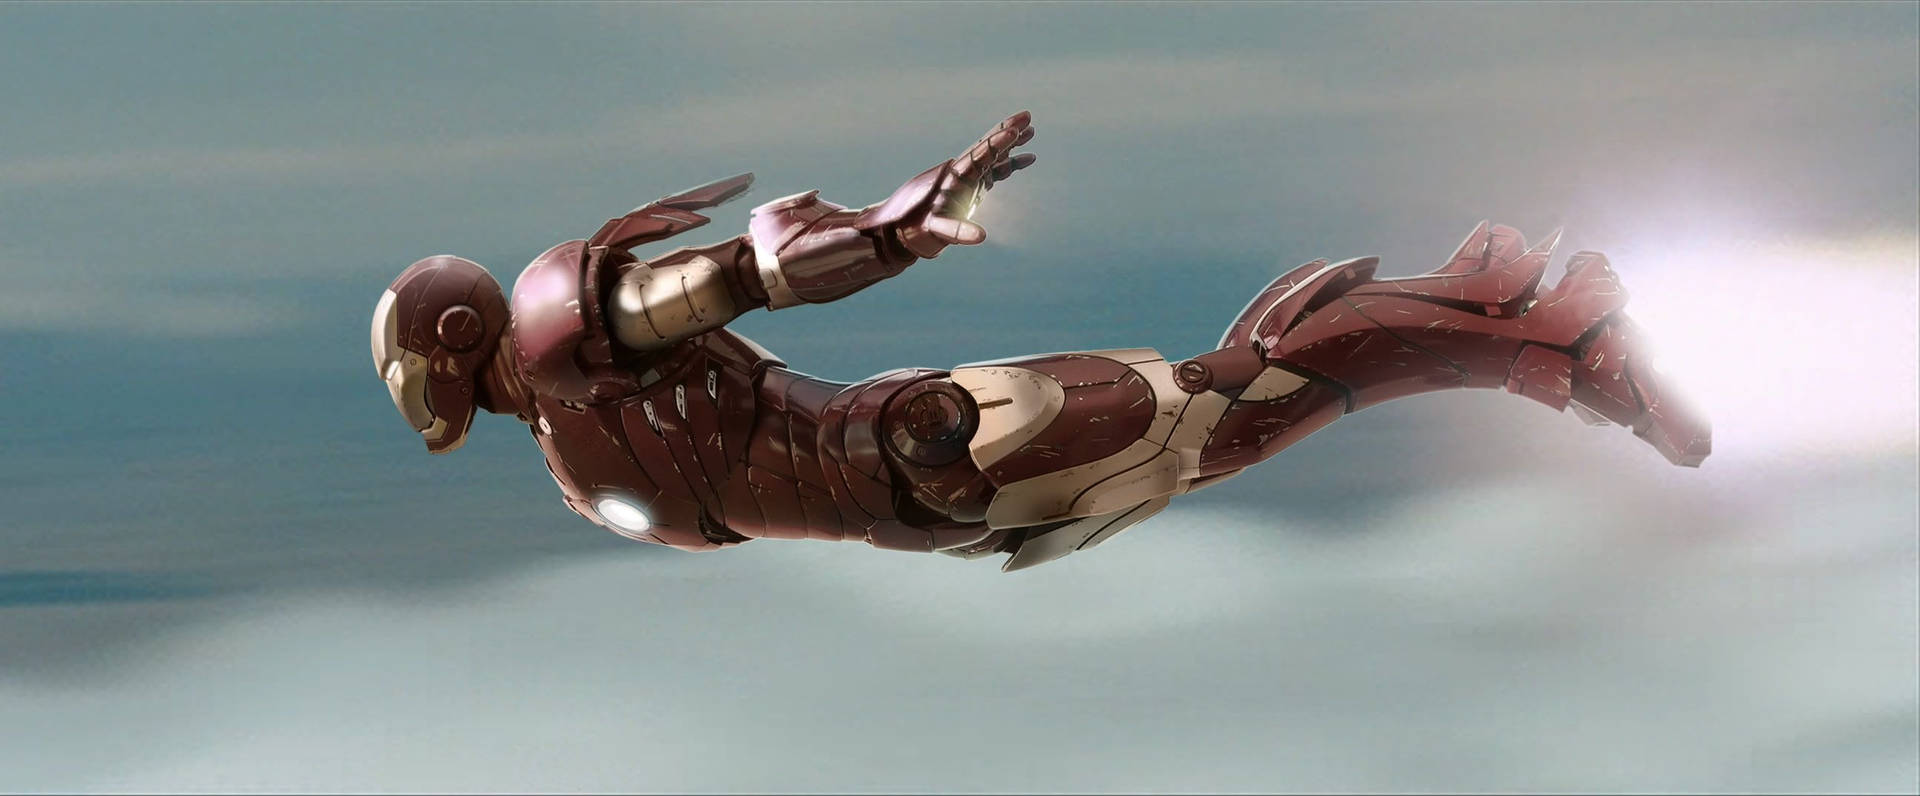 Ironman is flying with drstrange cave 8K wallpaper download